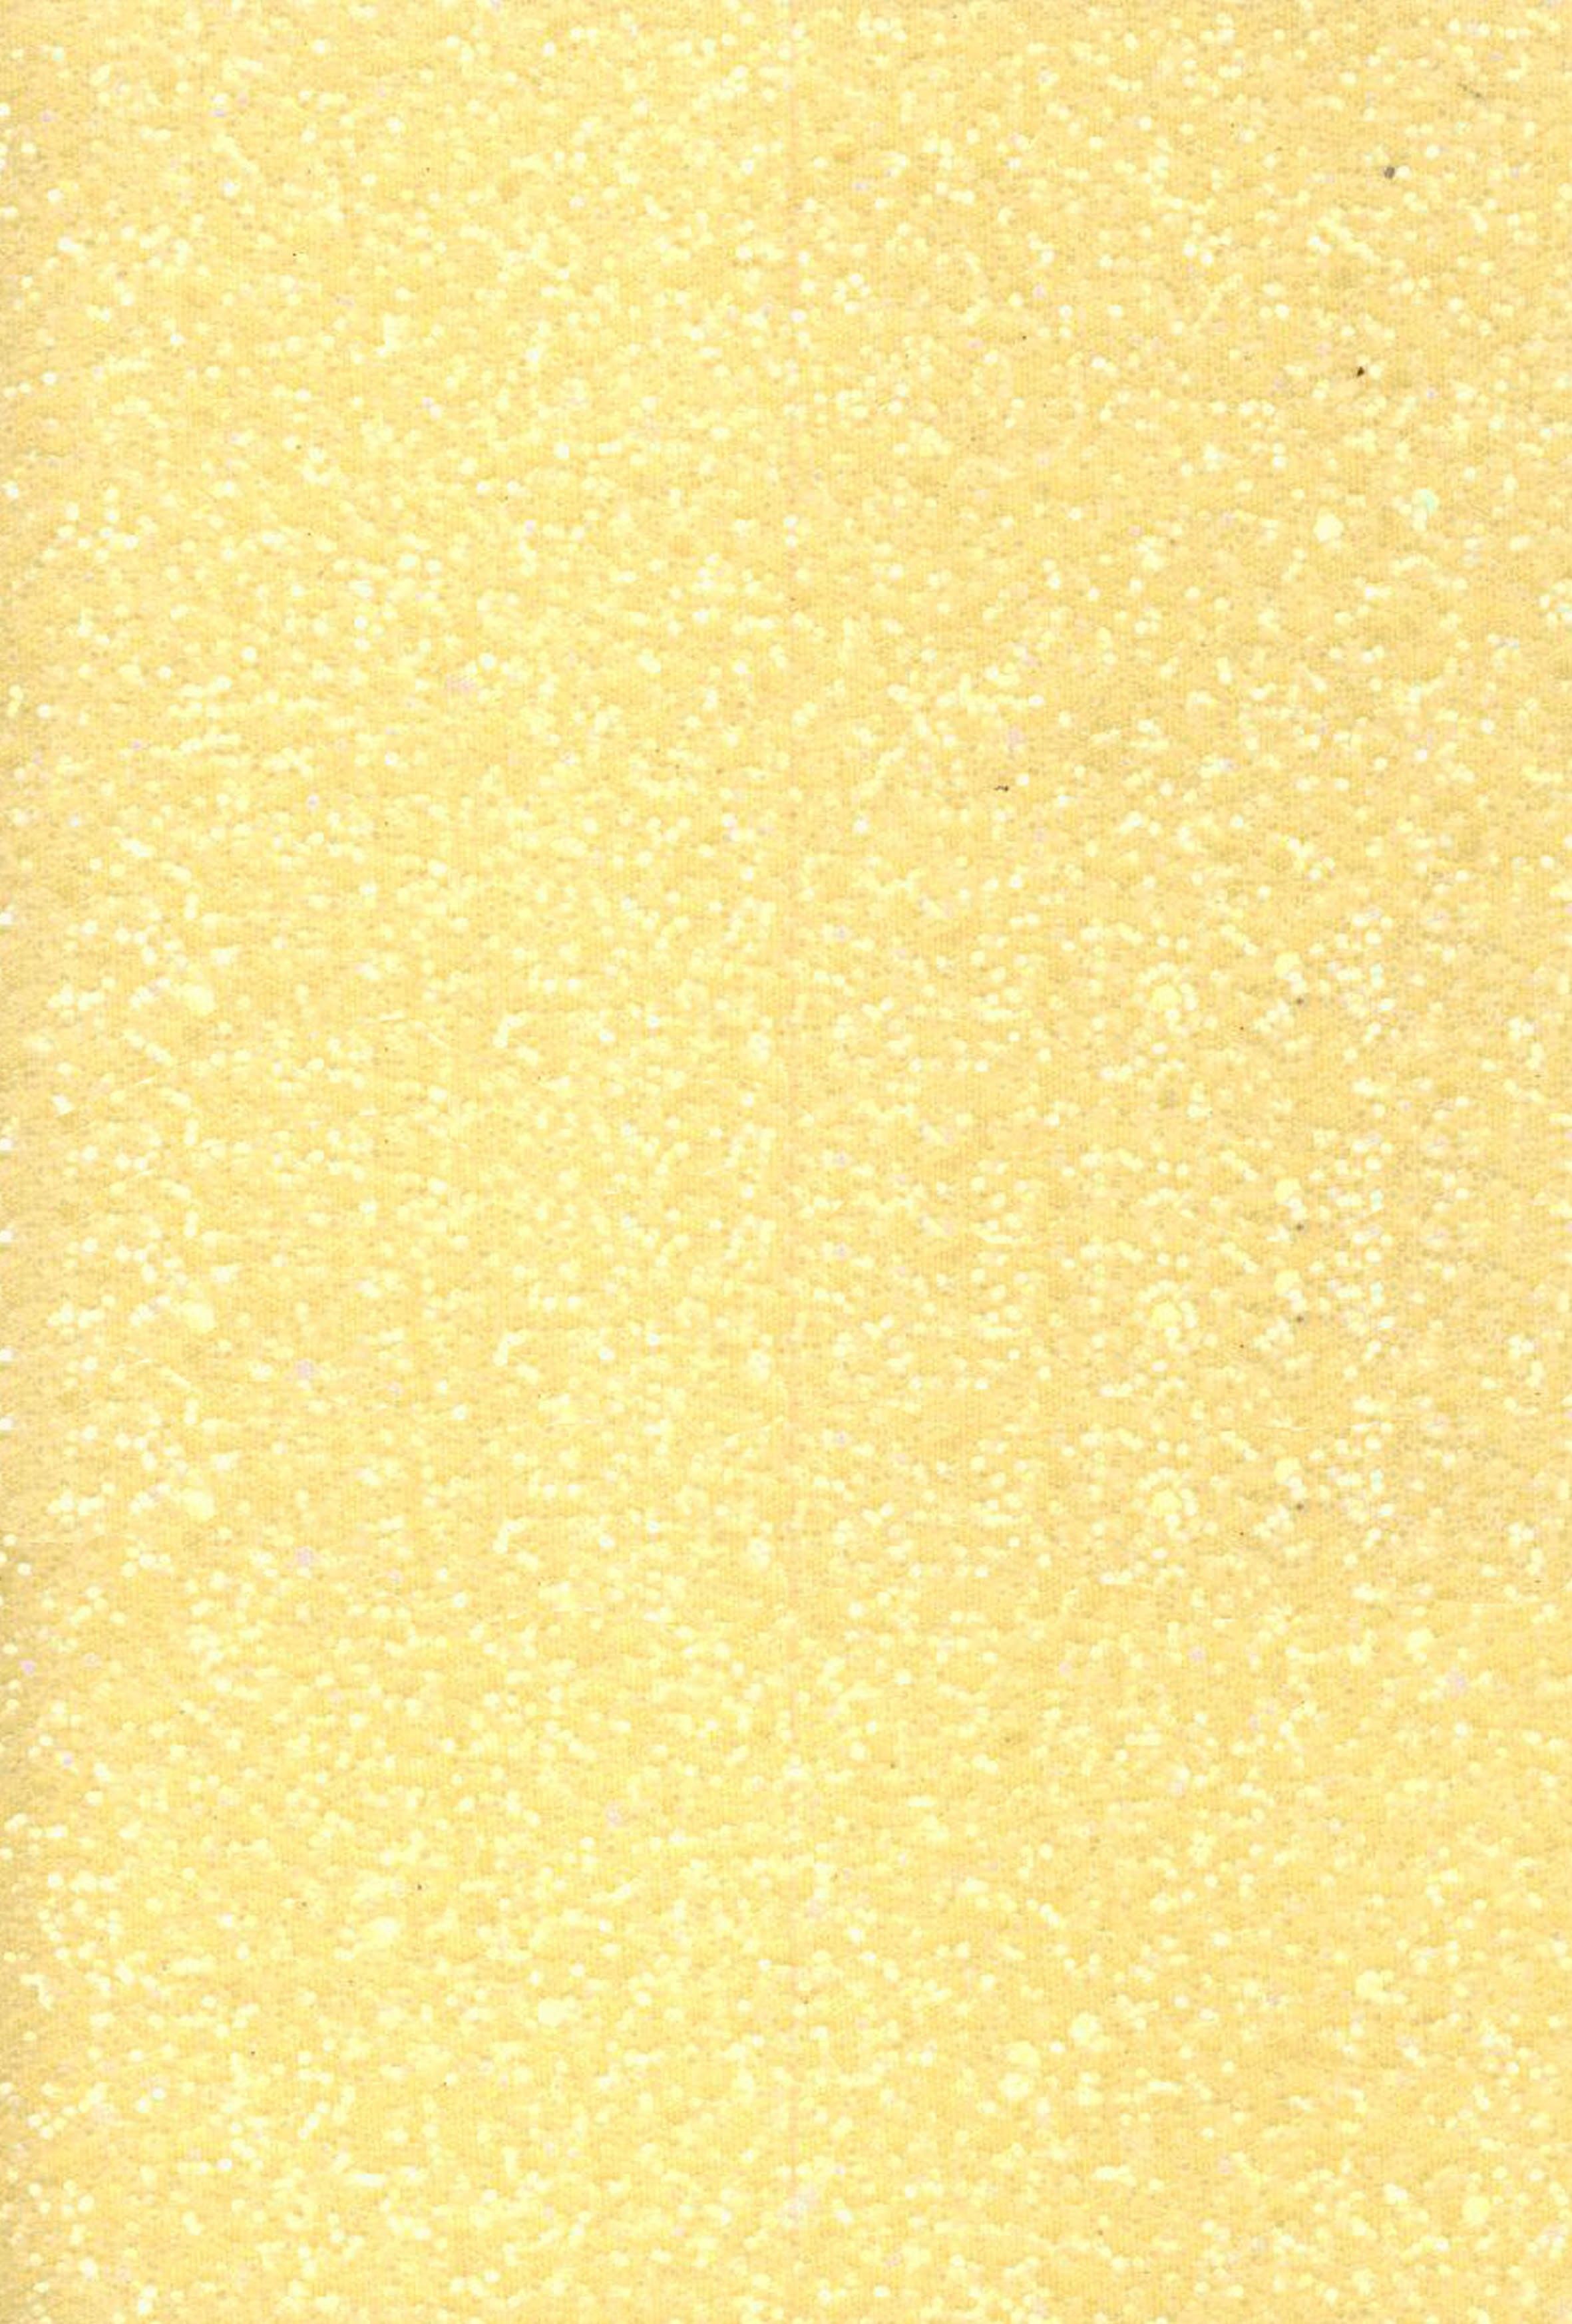 Yellow Glitter Wallpapers - Wallpaper Cave